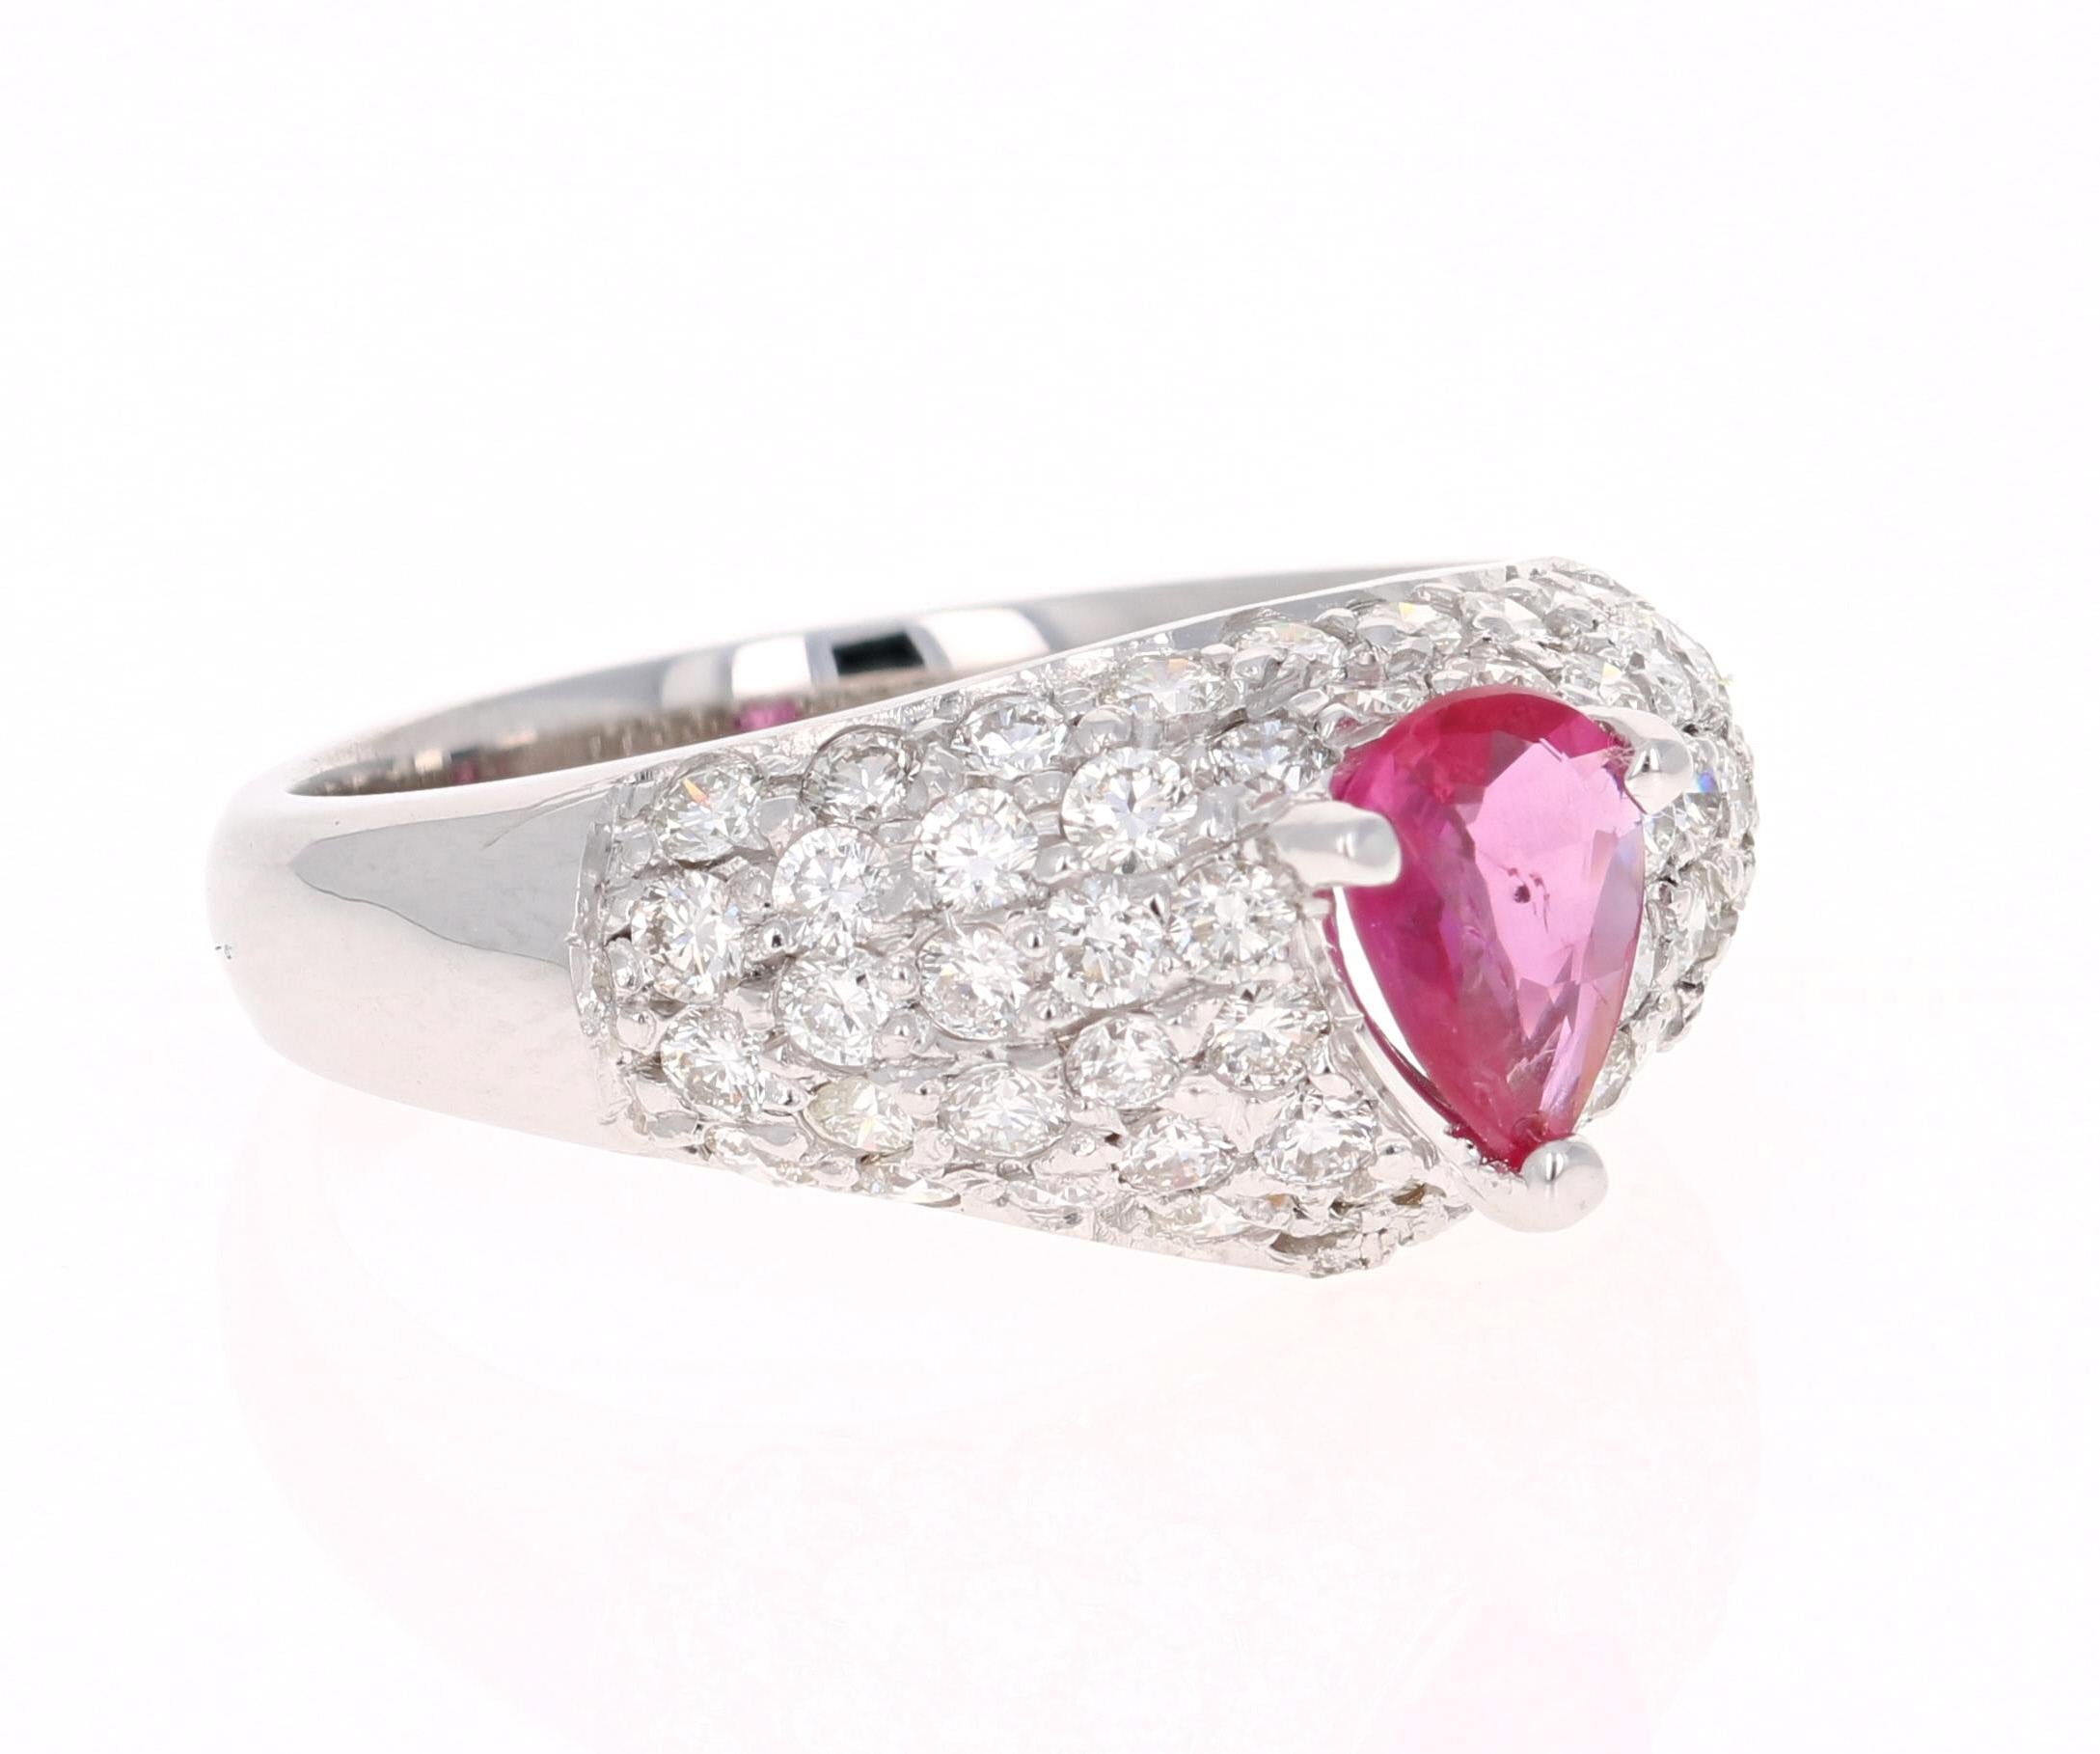 A simple yet beautiful ring with a 0.59 Carat Pear Cut Ruby as its center and 56 Round Cut Diamonds that weigh 1.37 carats.  The Clarity and Color of the Diamonds is VS2 and H Color. The total carat weight of the ring is 1.96 carats.

The ring is